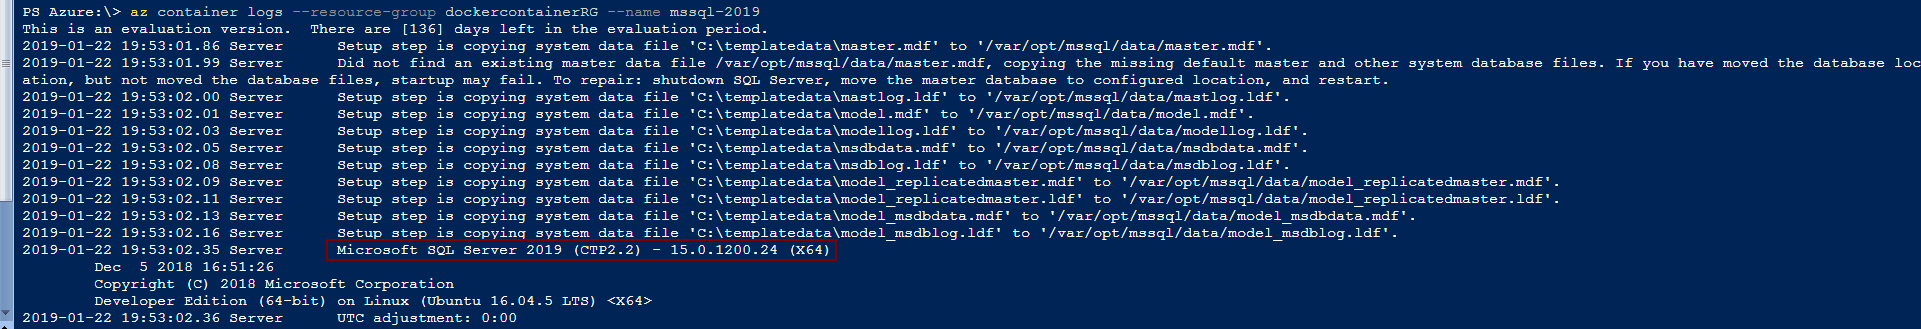 Azure PowerShell module - Az contianer logs commands to view the status of MS SQL 2019.